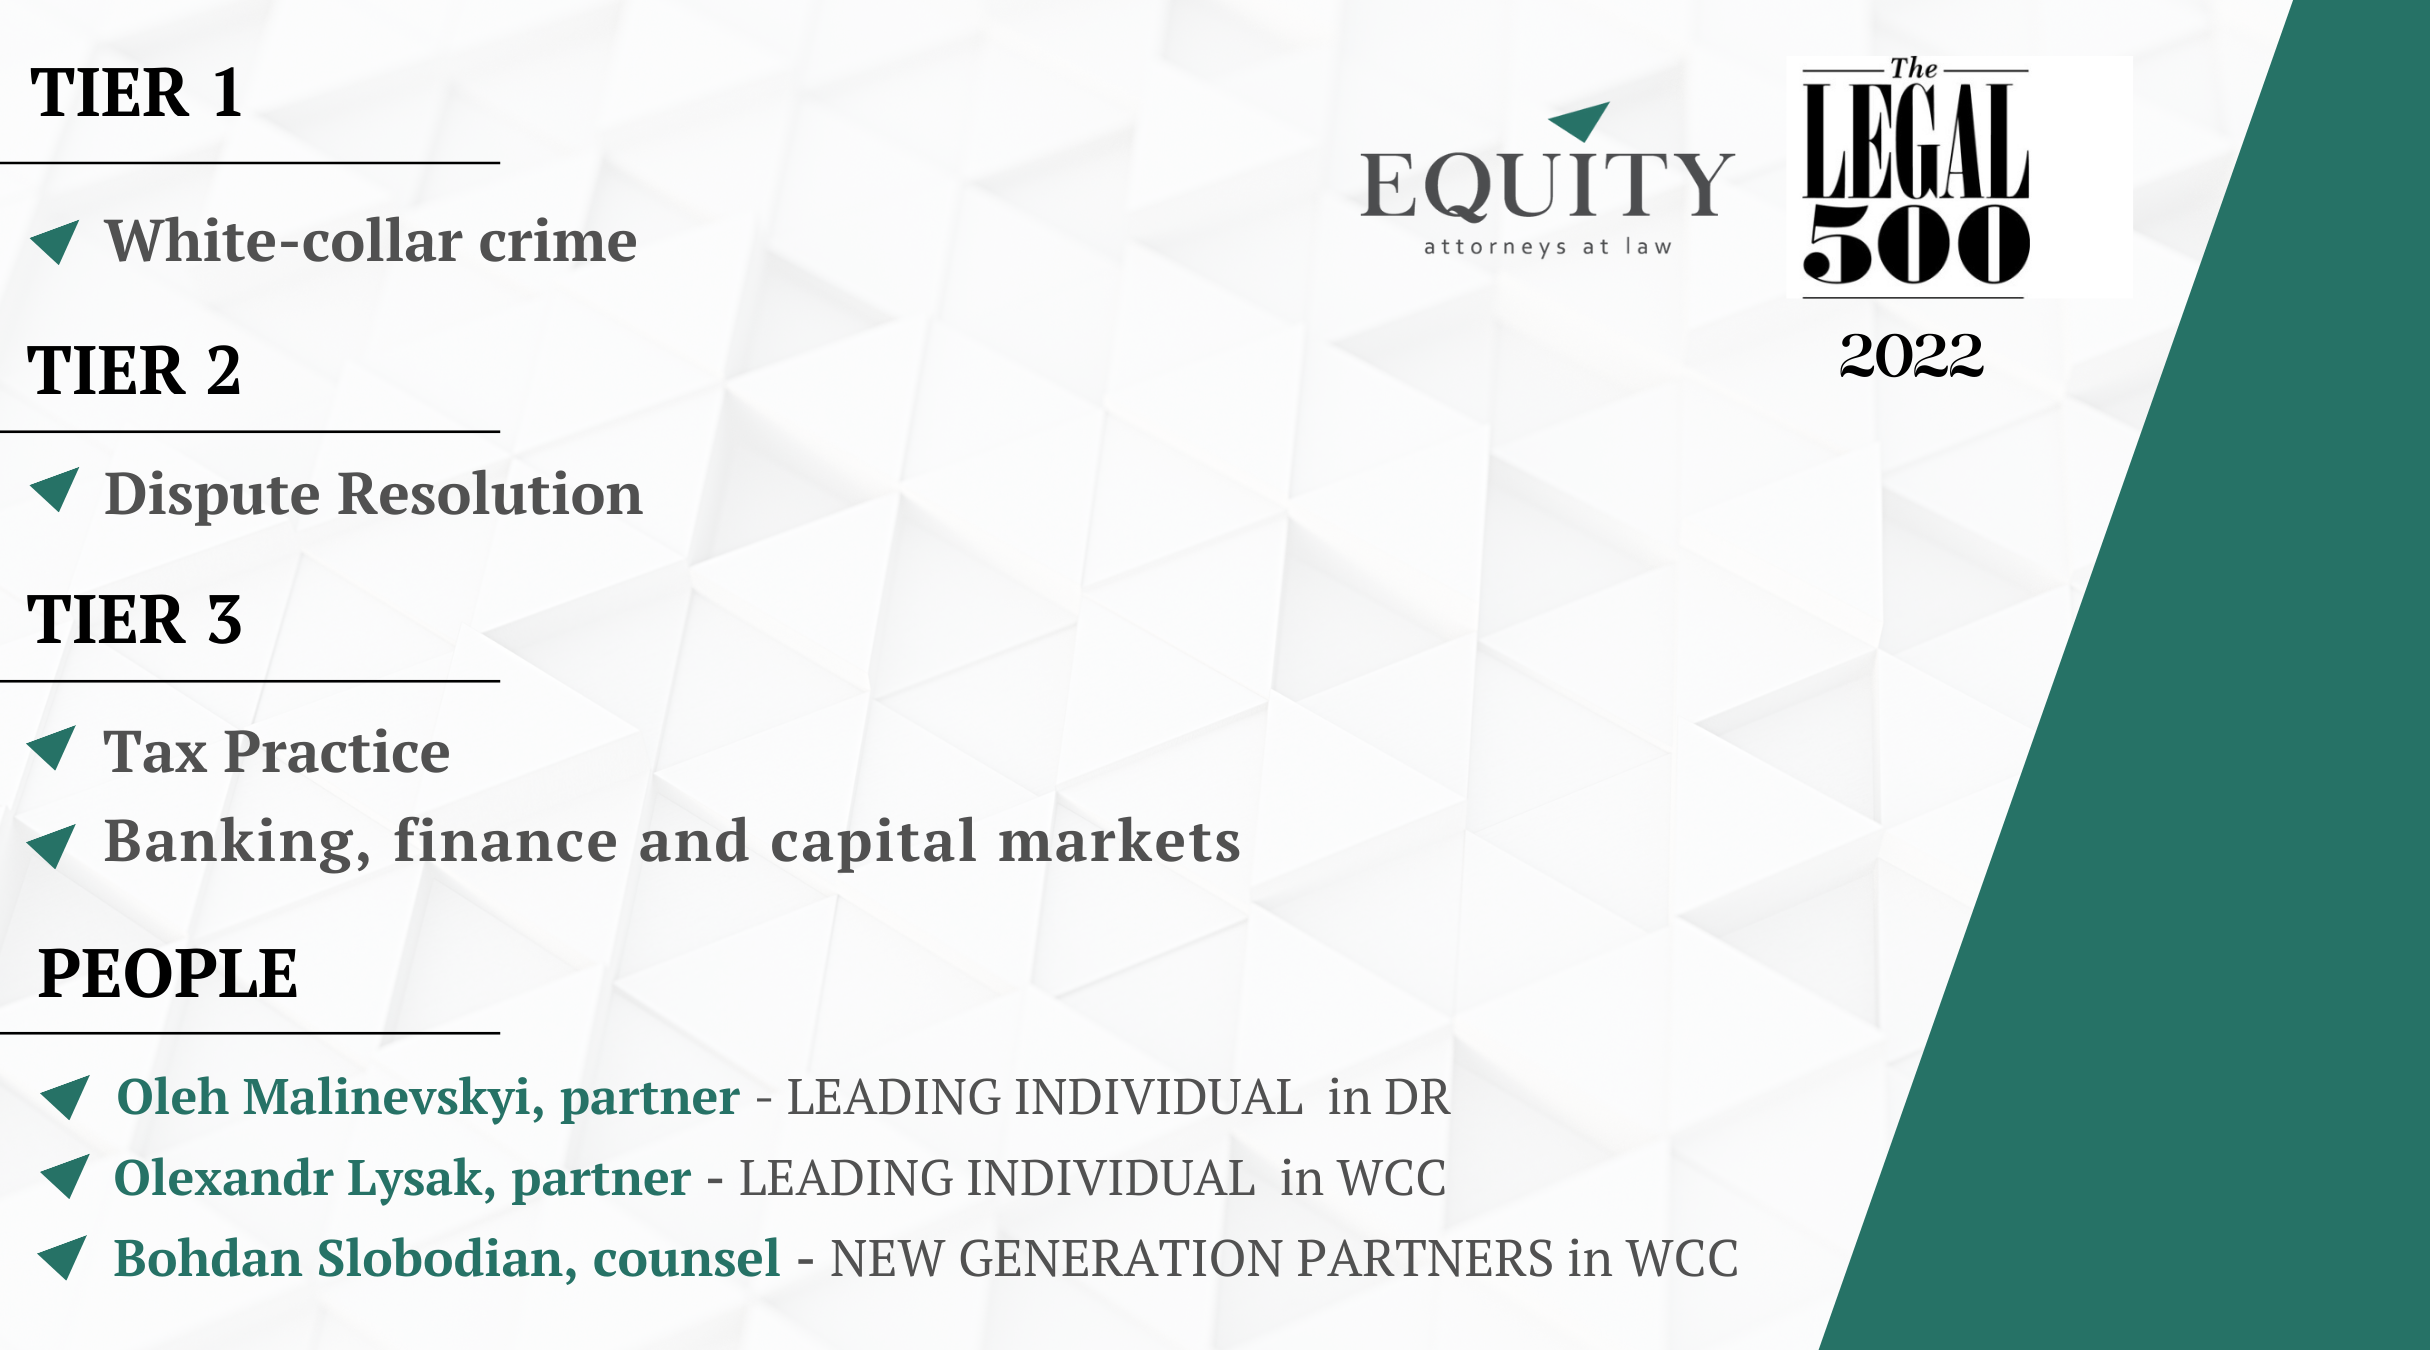 EQUITY was recognized by the international directory - Legal 500 EMEA 2022